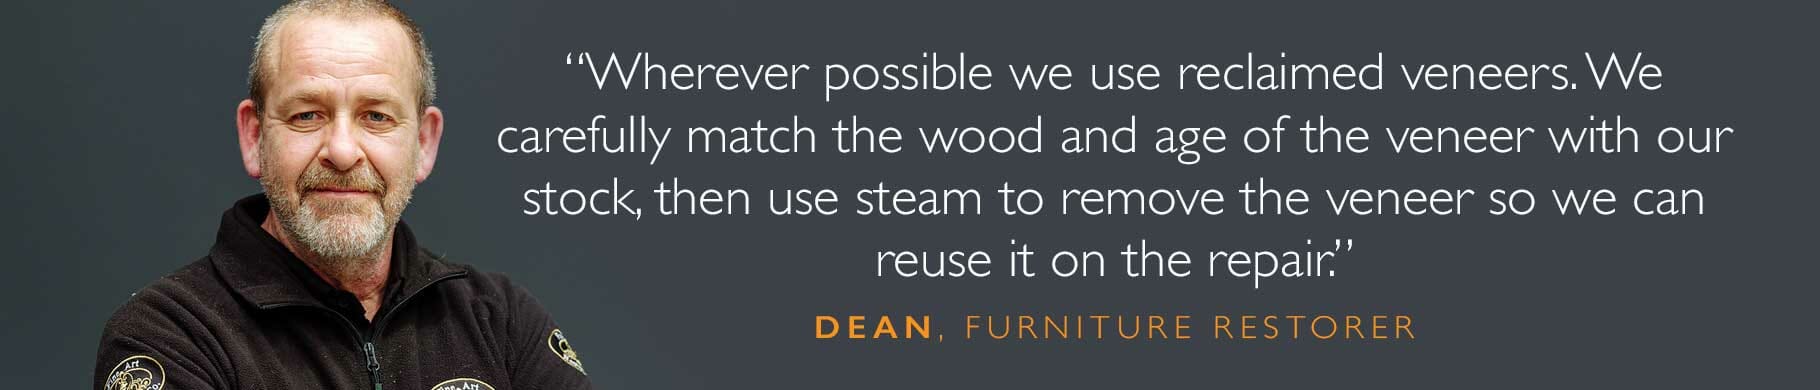 Dean reclaimed venners for restoration quote